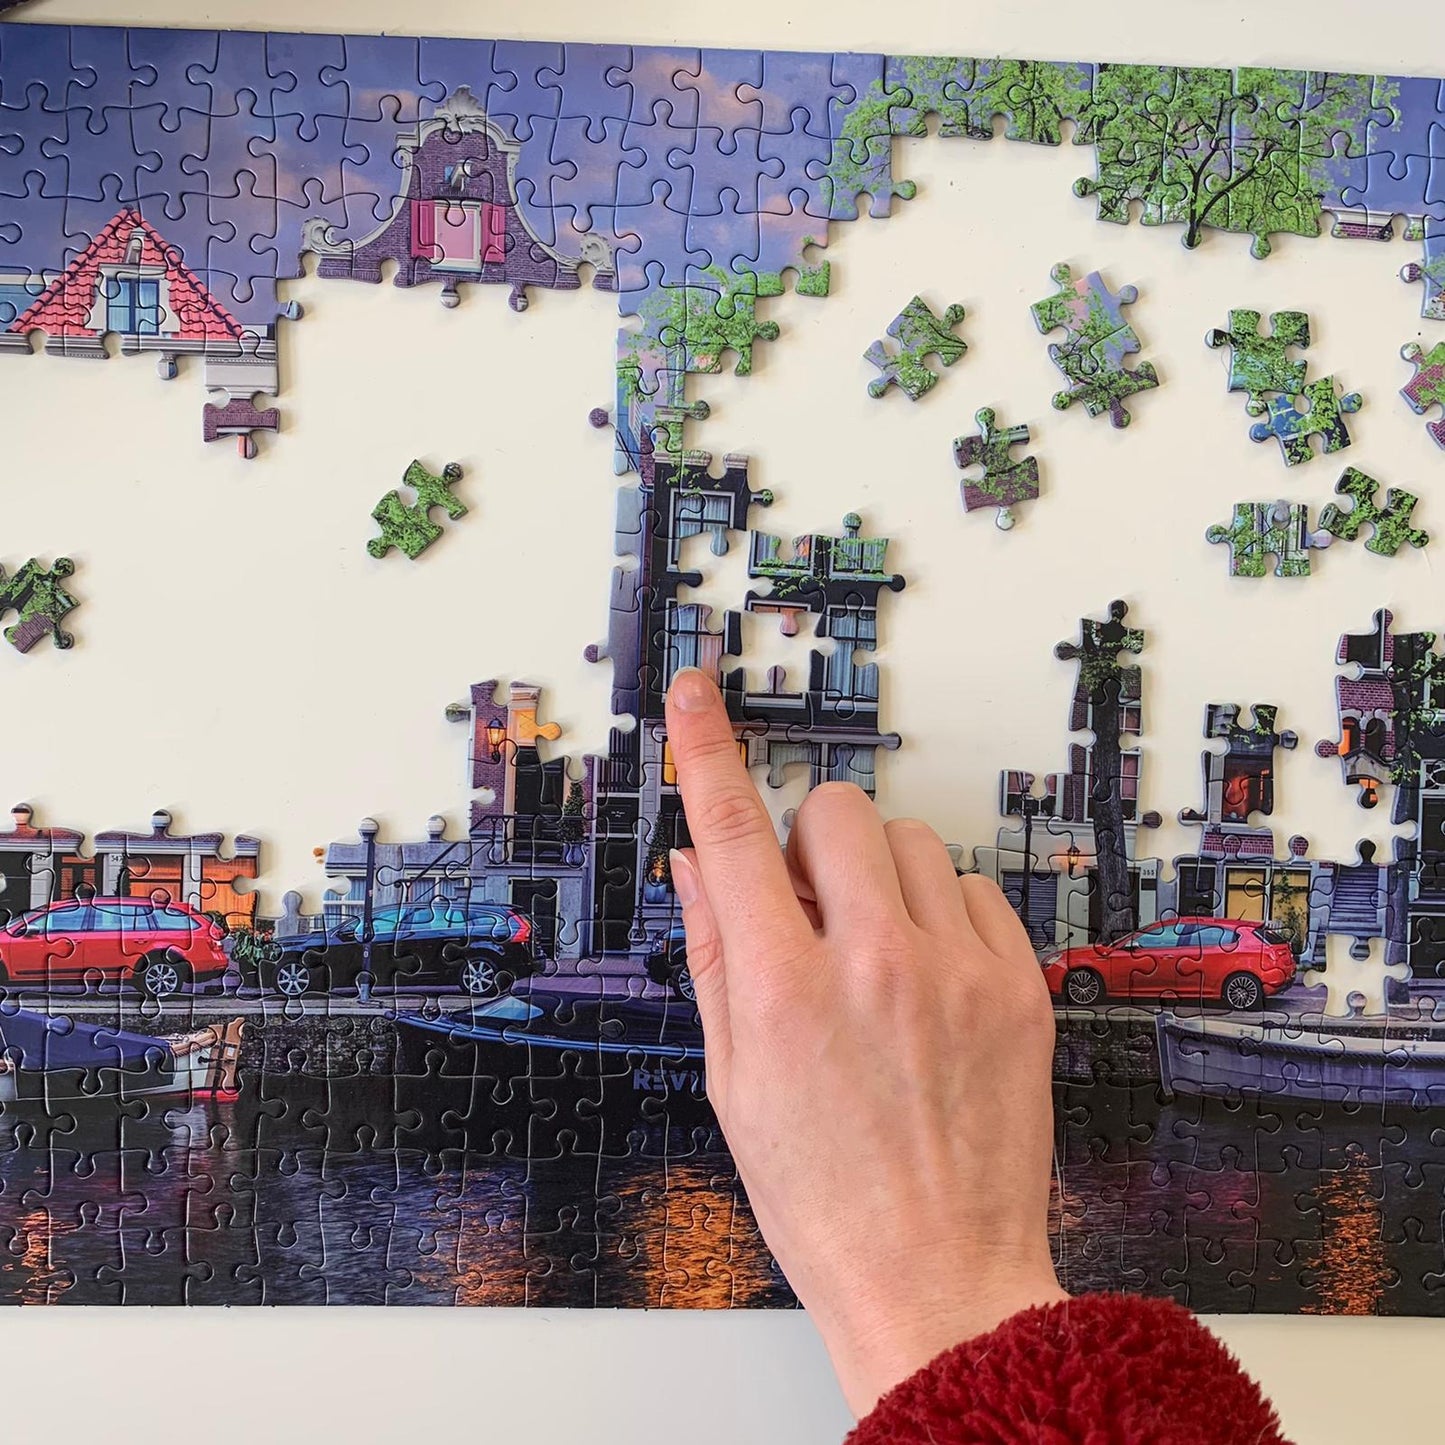 Gibsons - Amsterdam - 636 Piece Jigsaw Puzzle